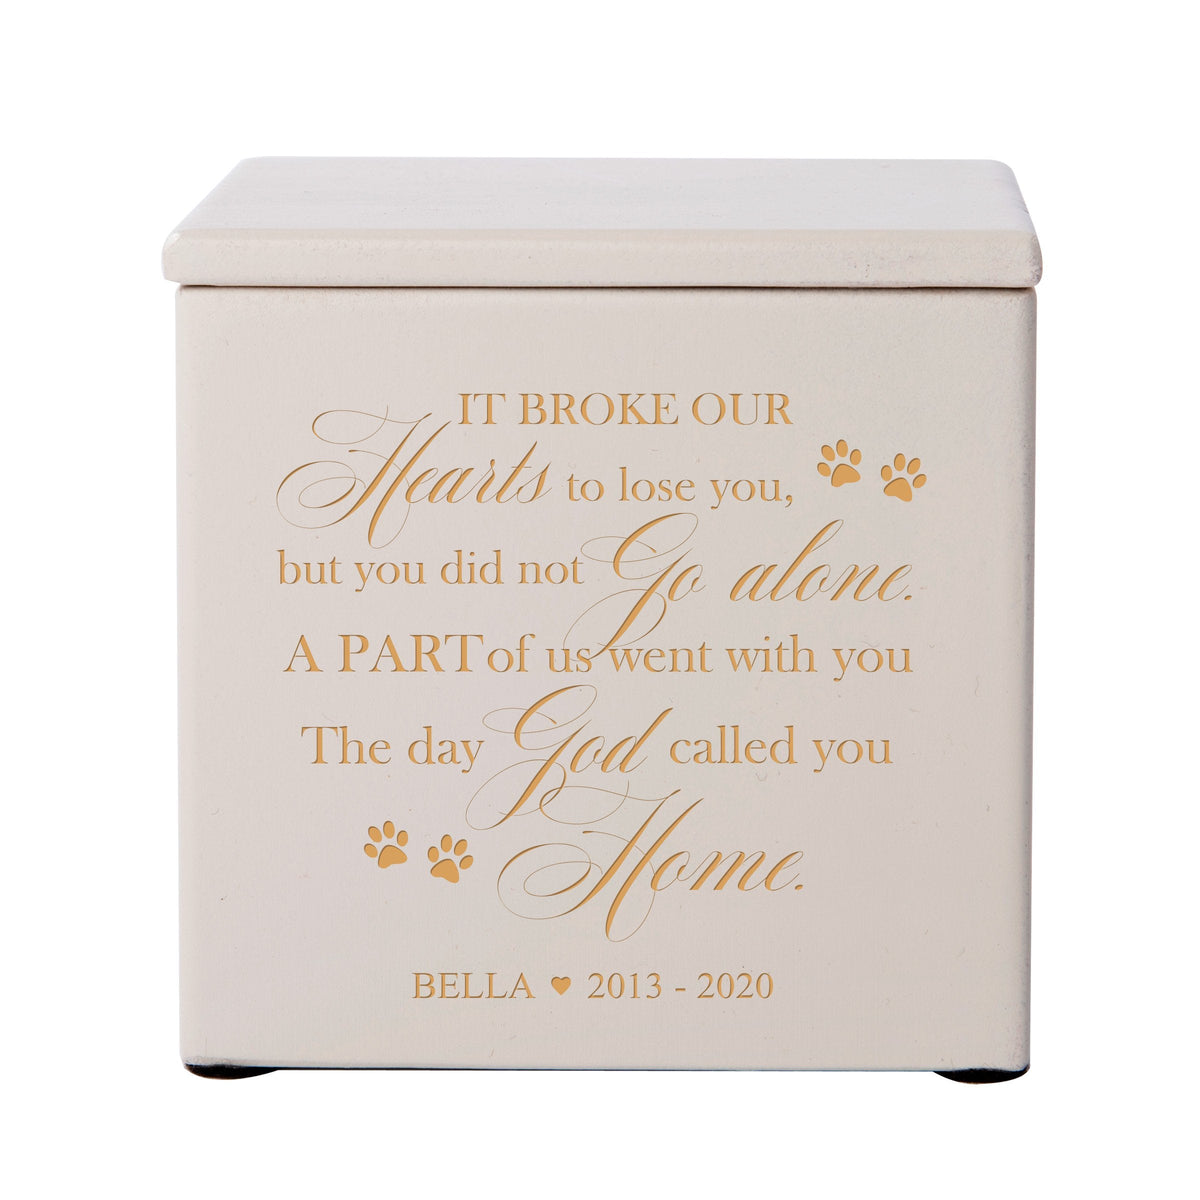 Ivory Pet Memorial 3.5x3.5 Keepsake Urn with phrase &quot;It Broke Our Hearts&quot;